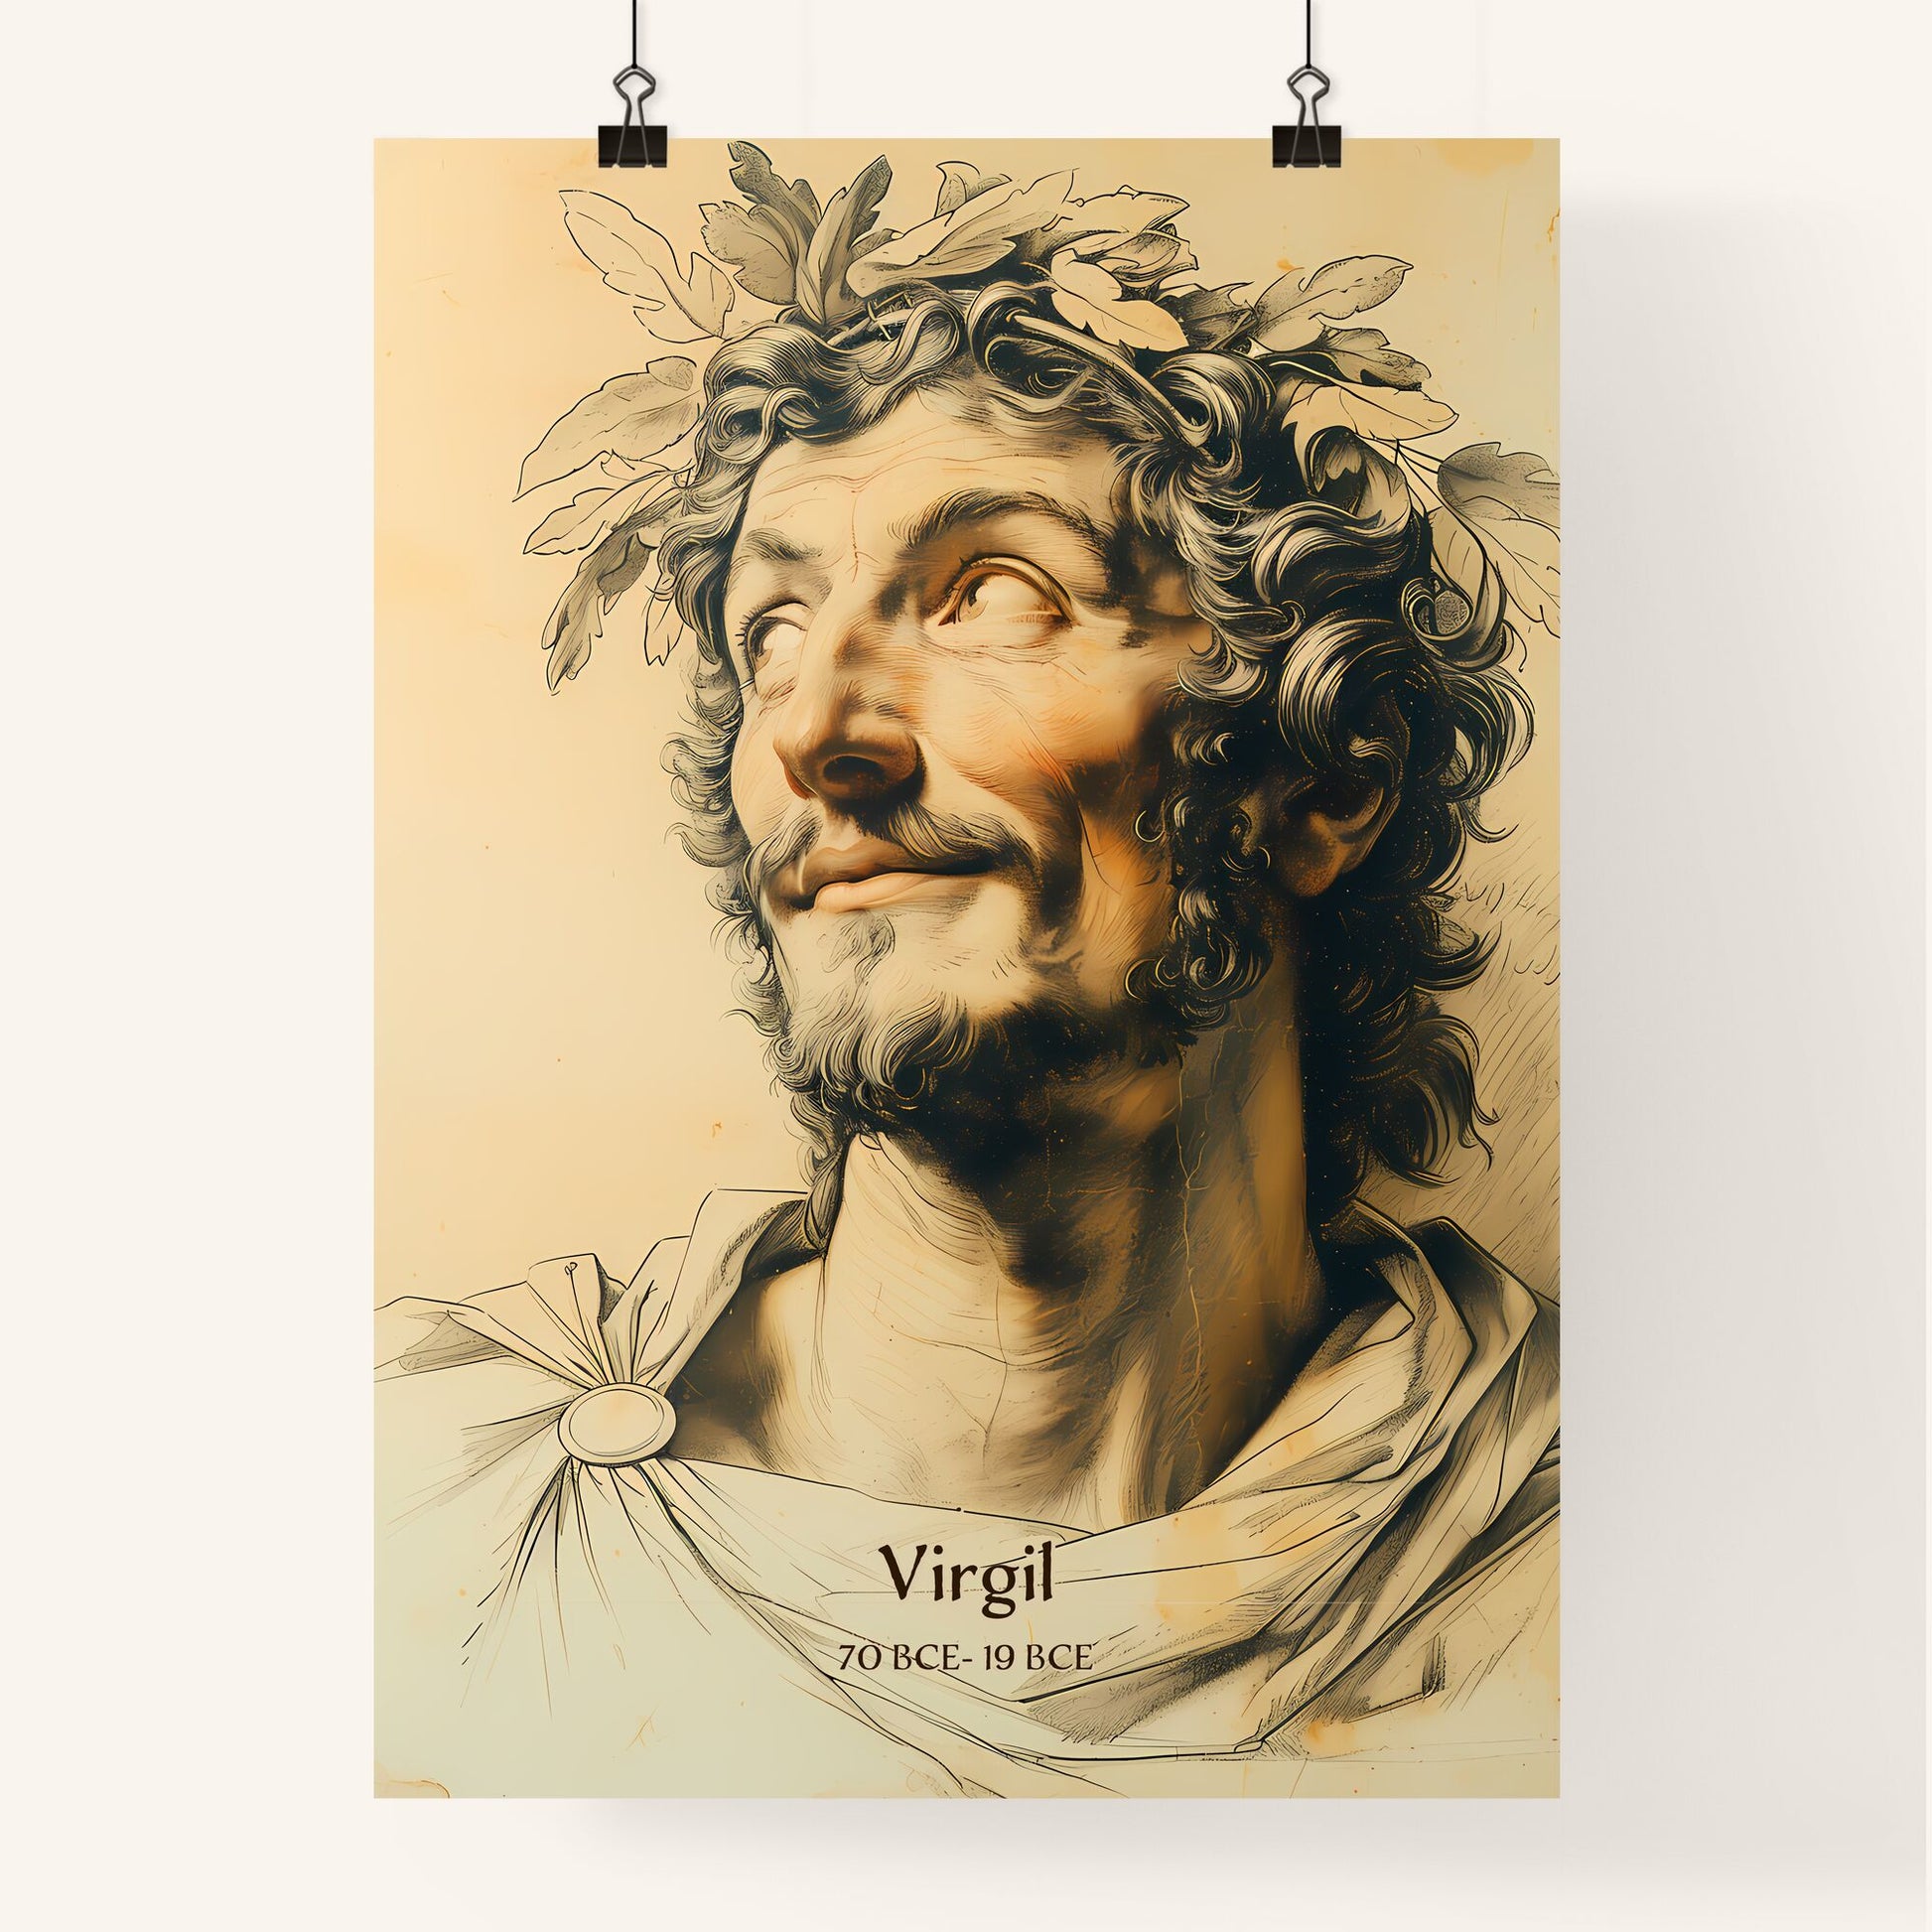 Virgil, 70 BCE- 19 BCE, A Poster of a drawing of a man with a beard and a crown of leaves Default Title